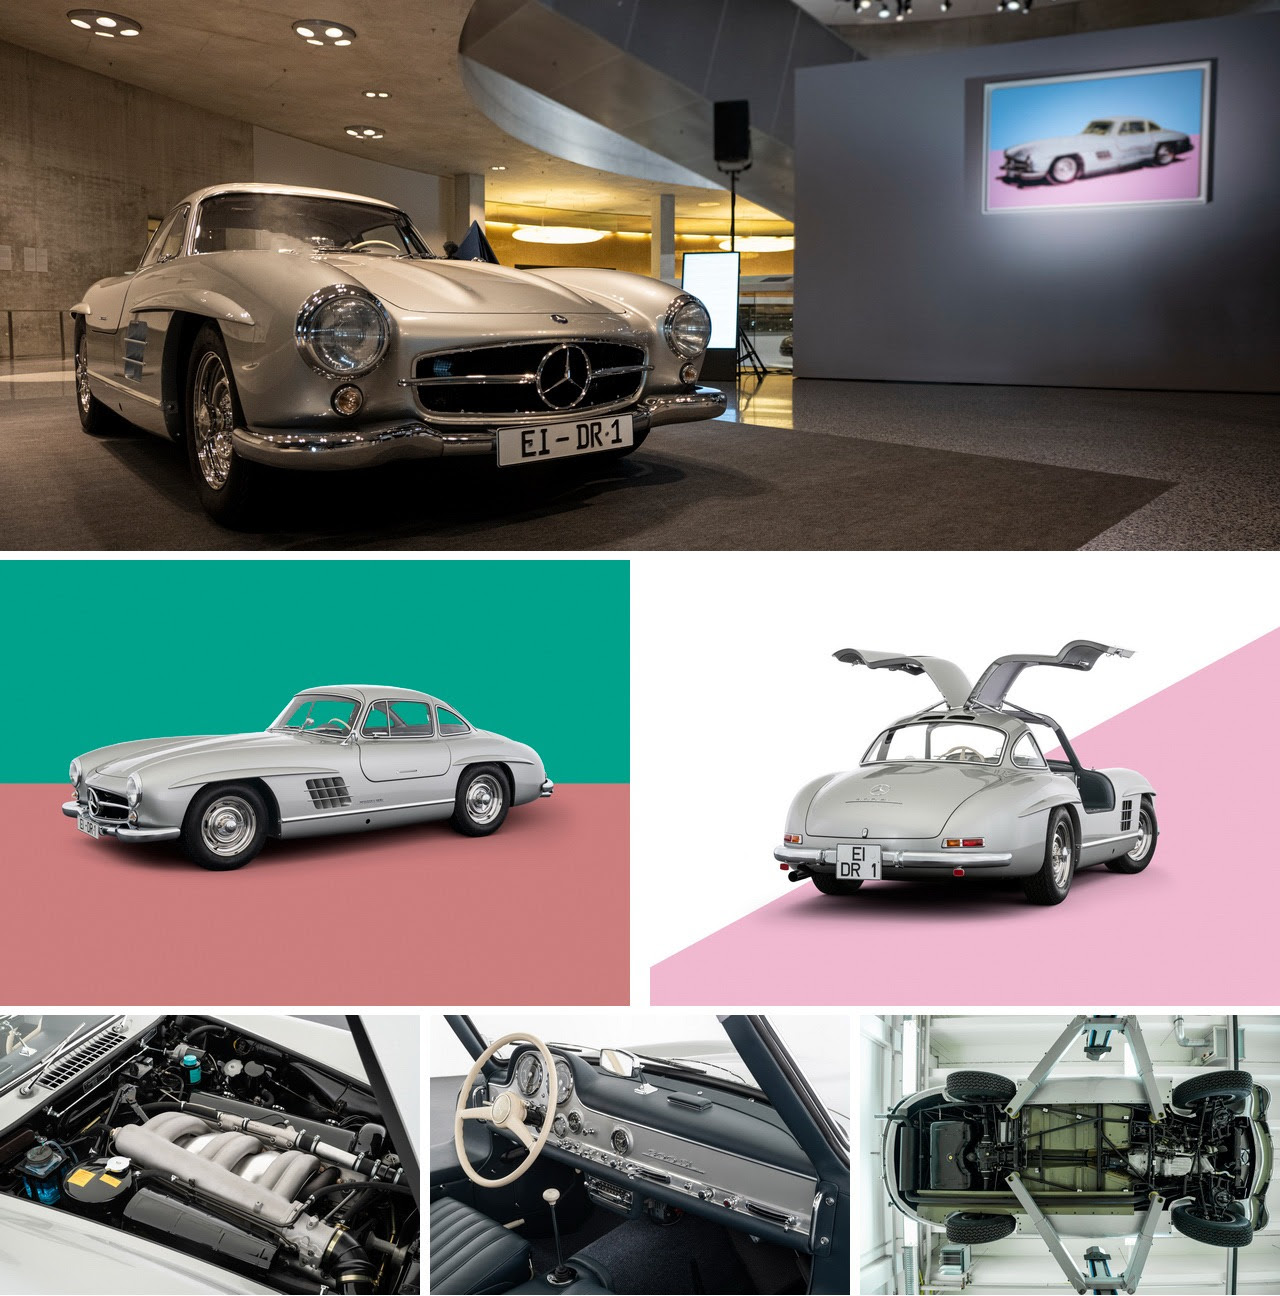 Icon Meets Icon: Presenting the Mercedes 300 SL Used by Andy Warhol in “Cars” Series